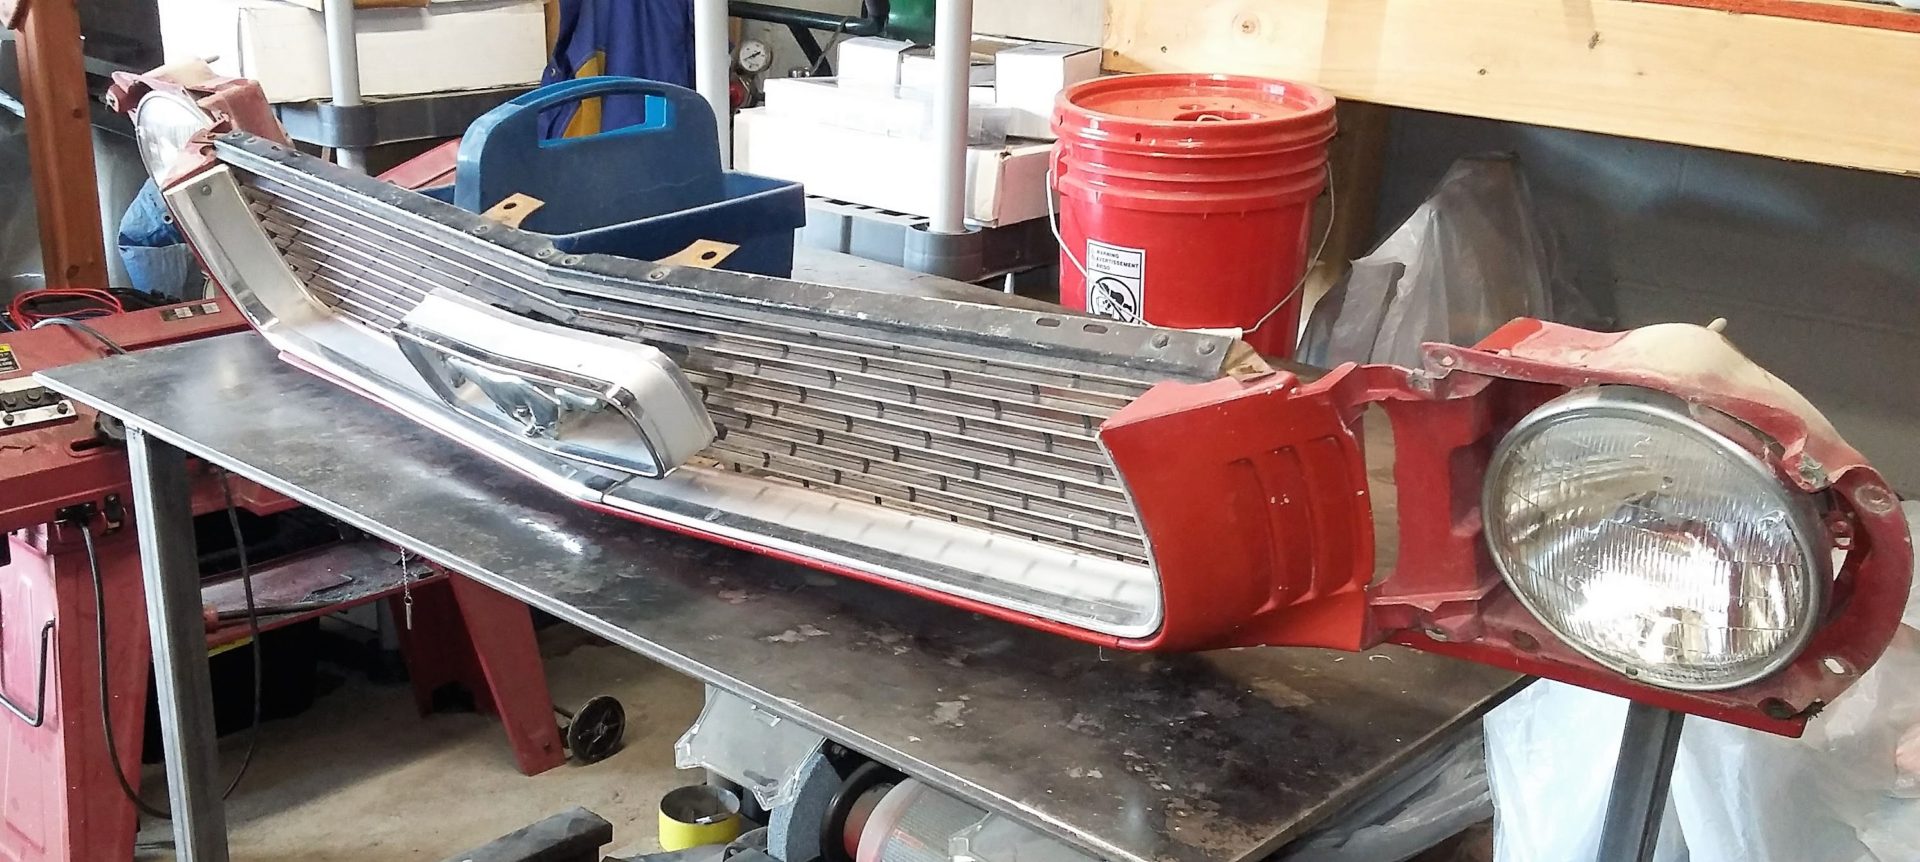 '66 Mustang grille and headlight assembly